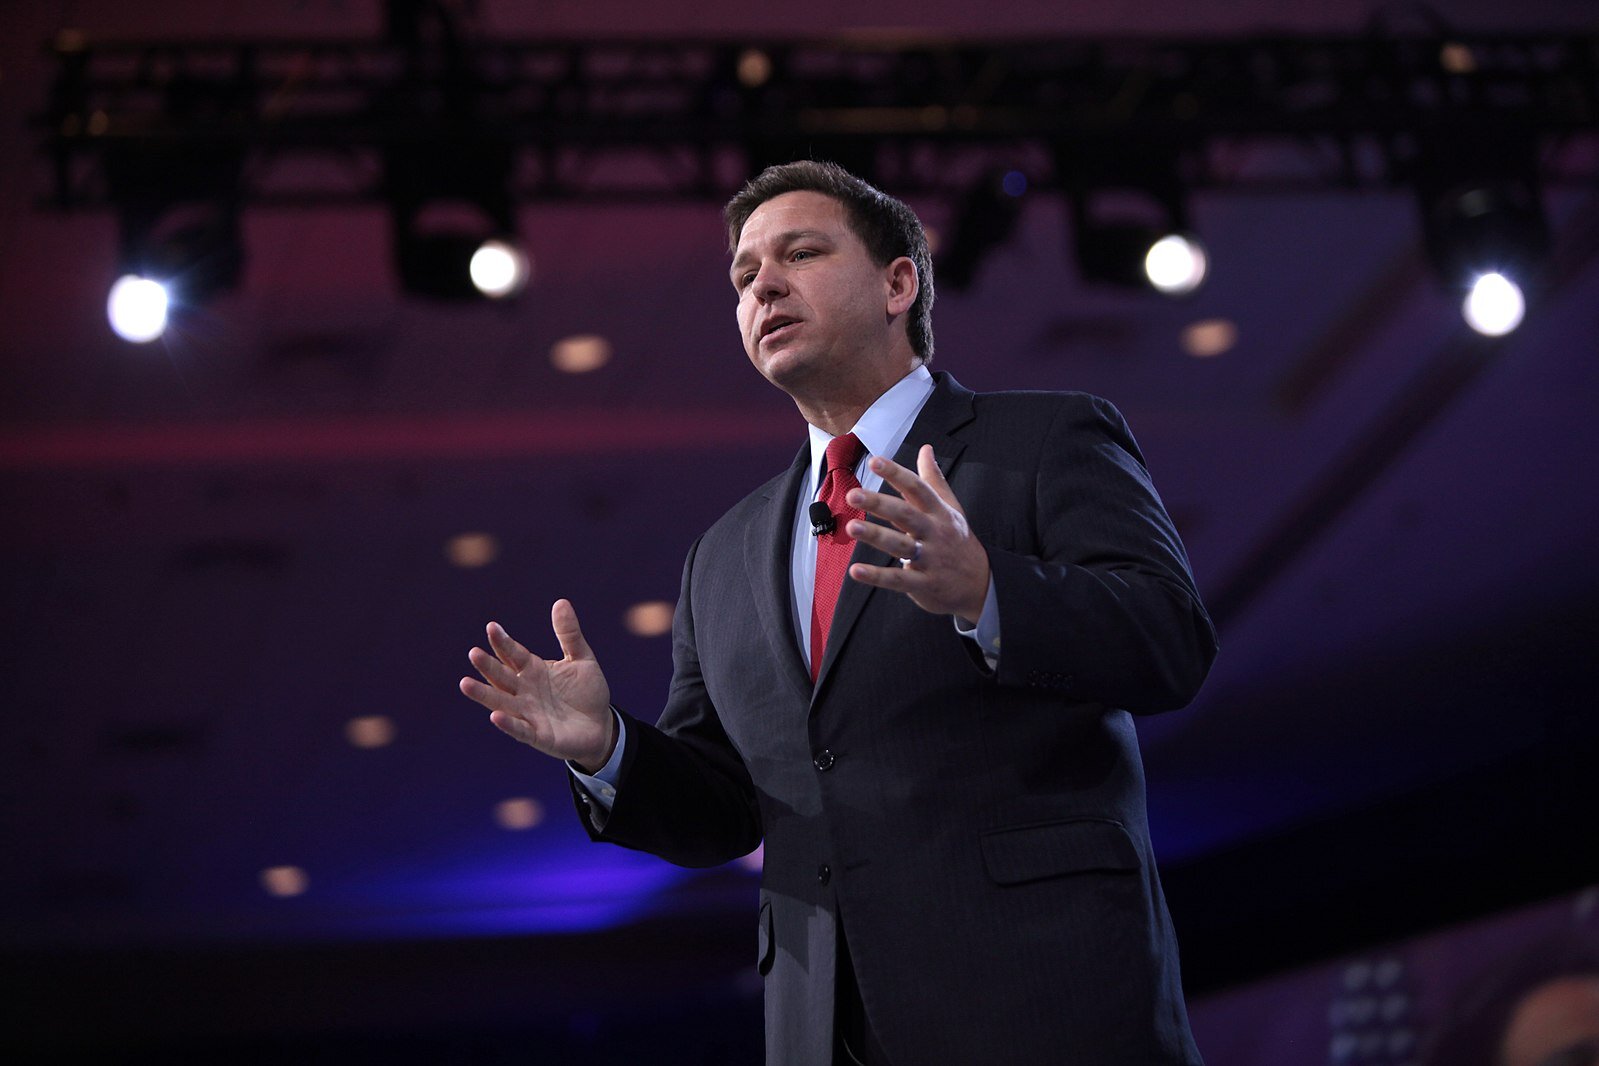 March 3, 2016 – Ron DeSantis speaking at the 2016 Conservative Political Action Conference (CPAC) in National Harbor, Maryland (Photo by Gage Skidmore | Wikimedia Commons)